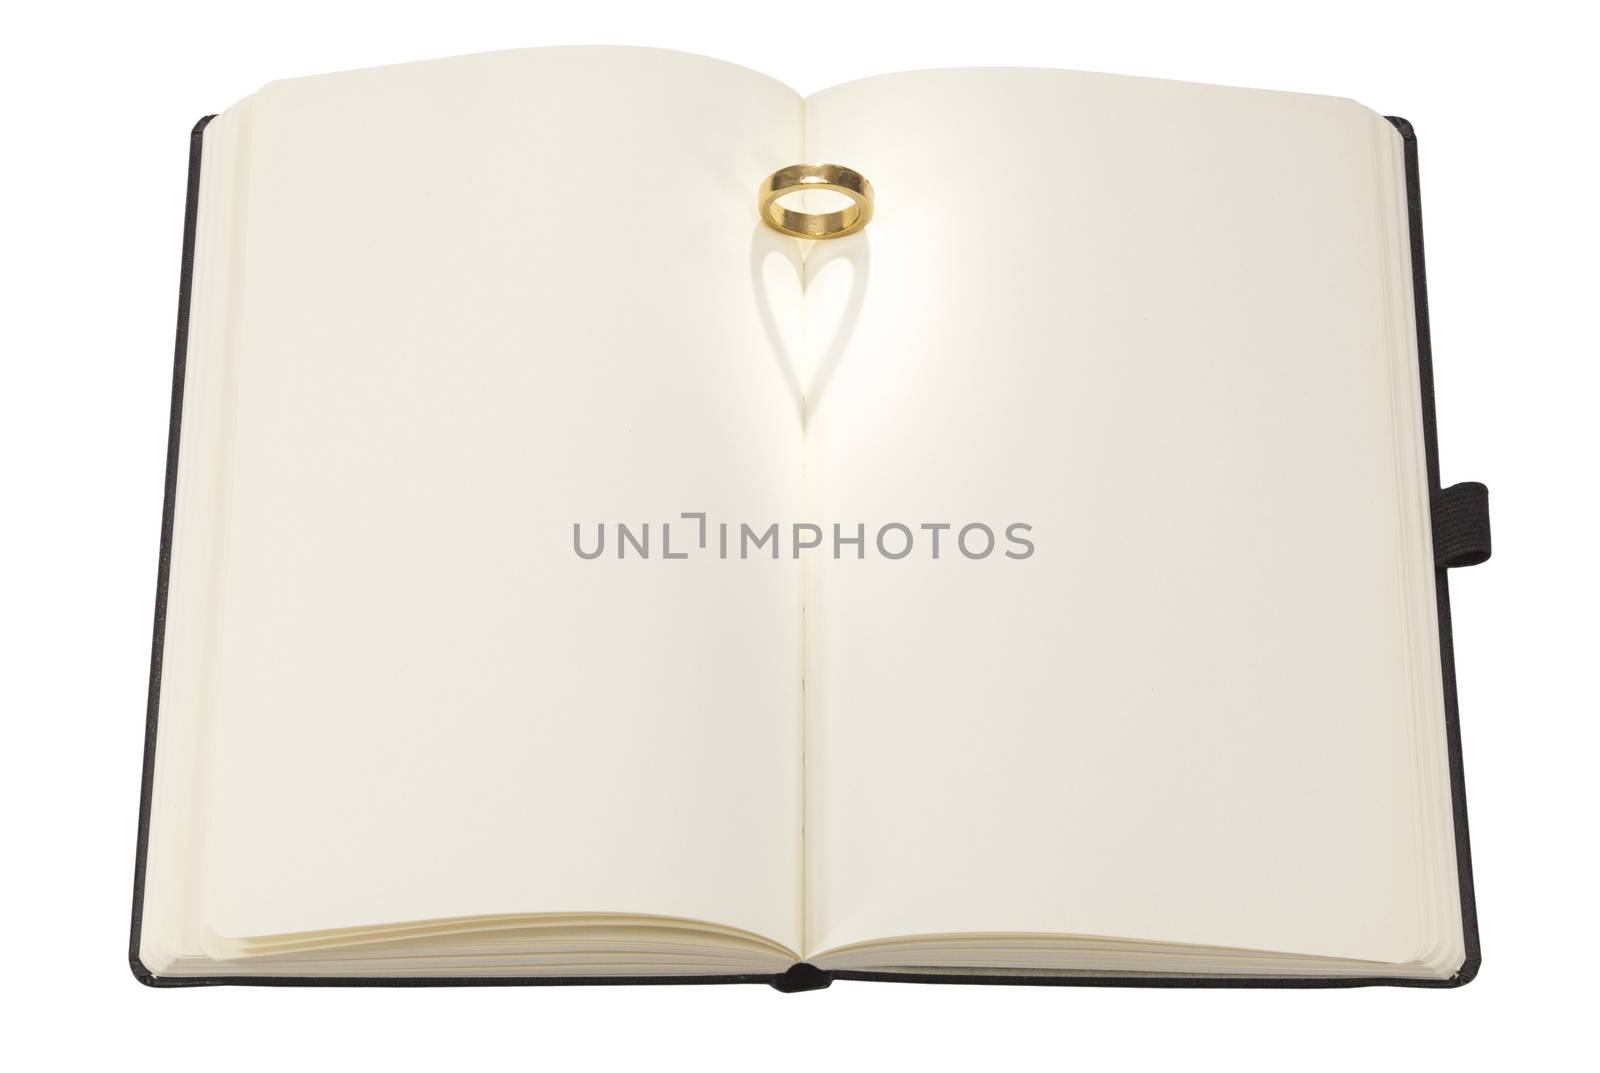 Heart shaped shadow of a ring on a book on white background